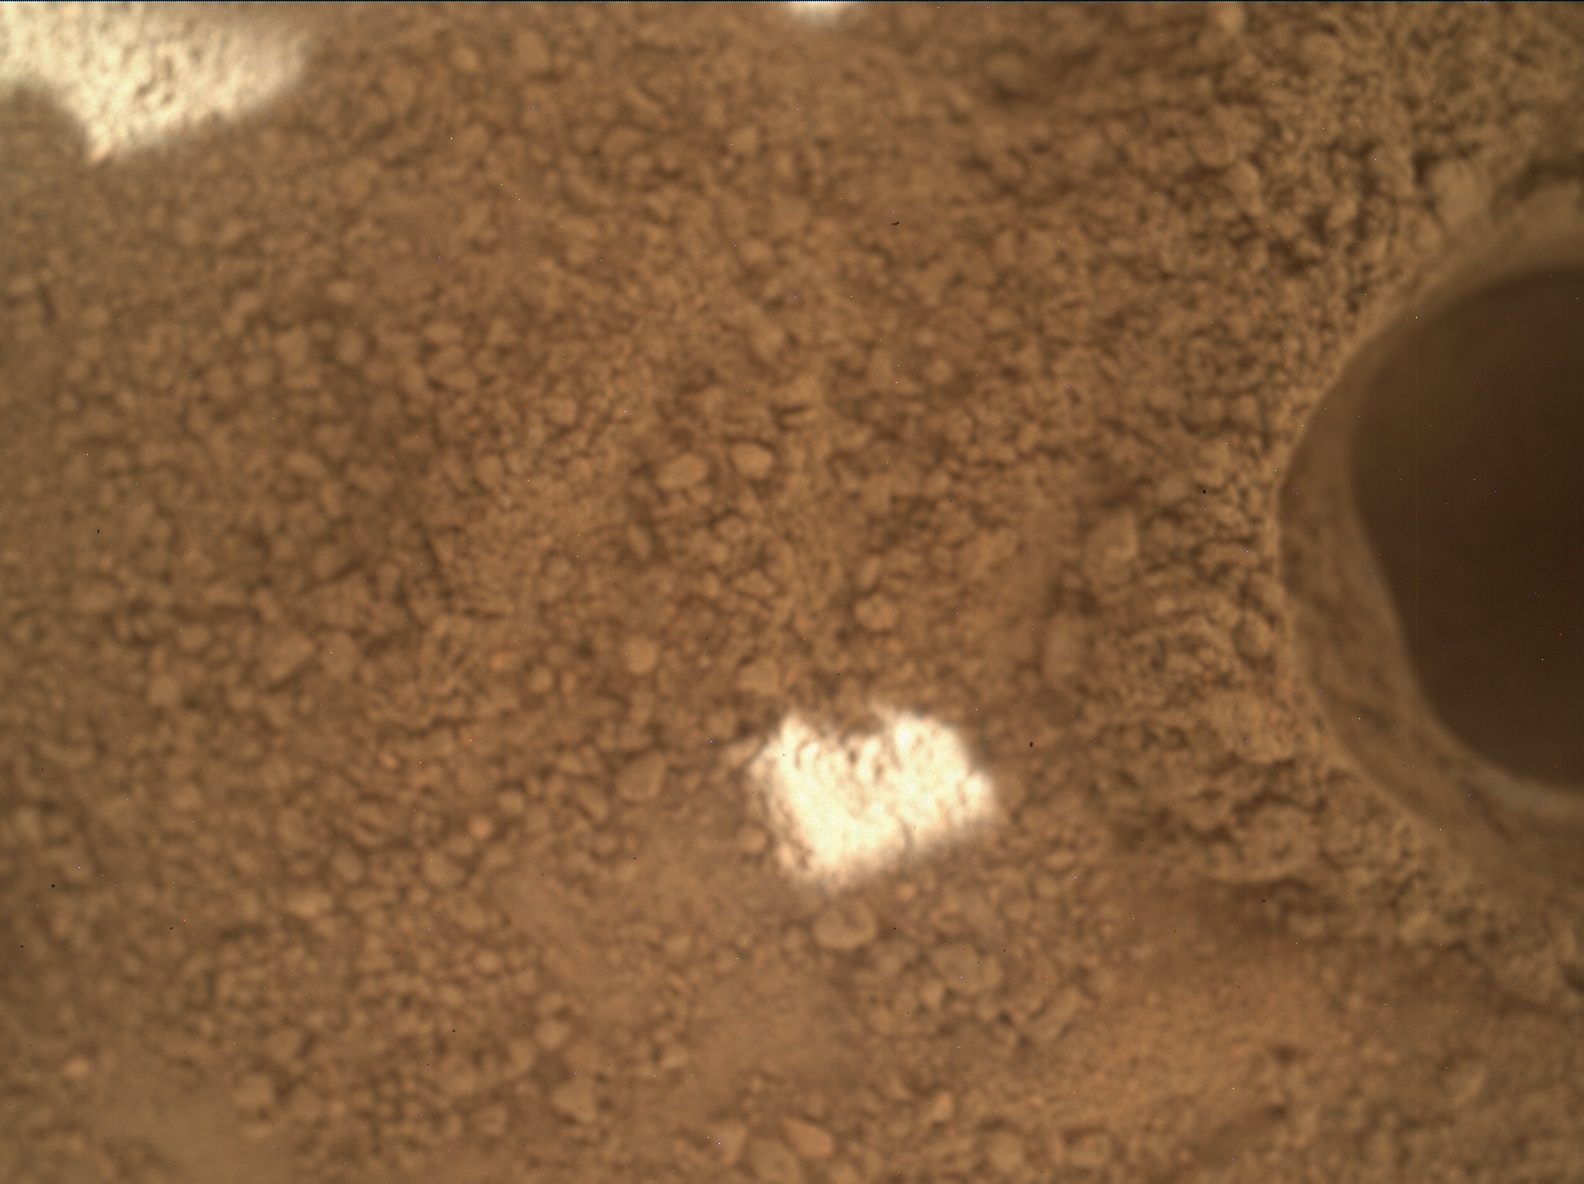 Nasa's Mars rover Curiosity acquired this image using its Mars Hand Lens Imager (MAHLI) on Sol 3682